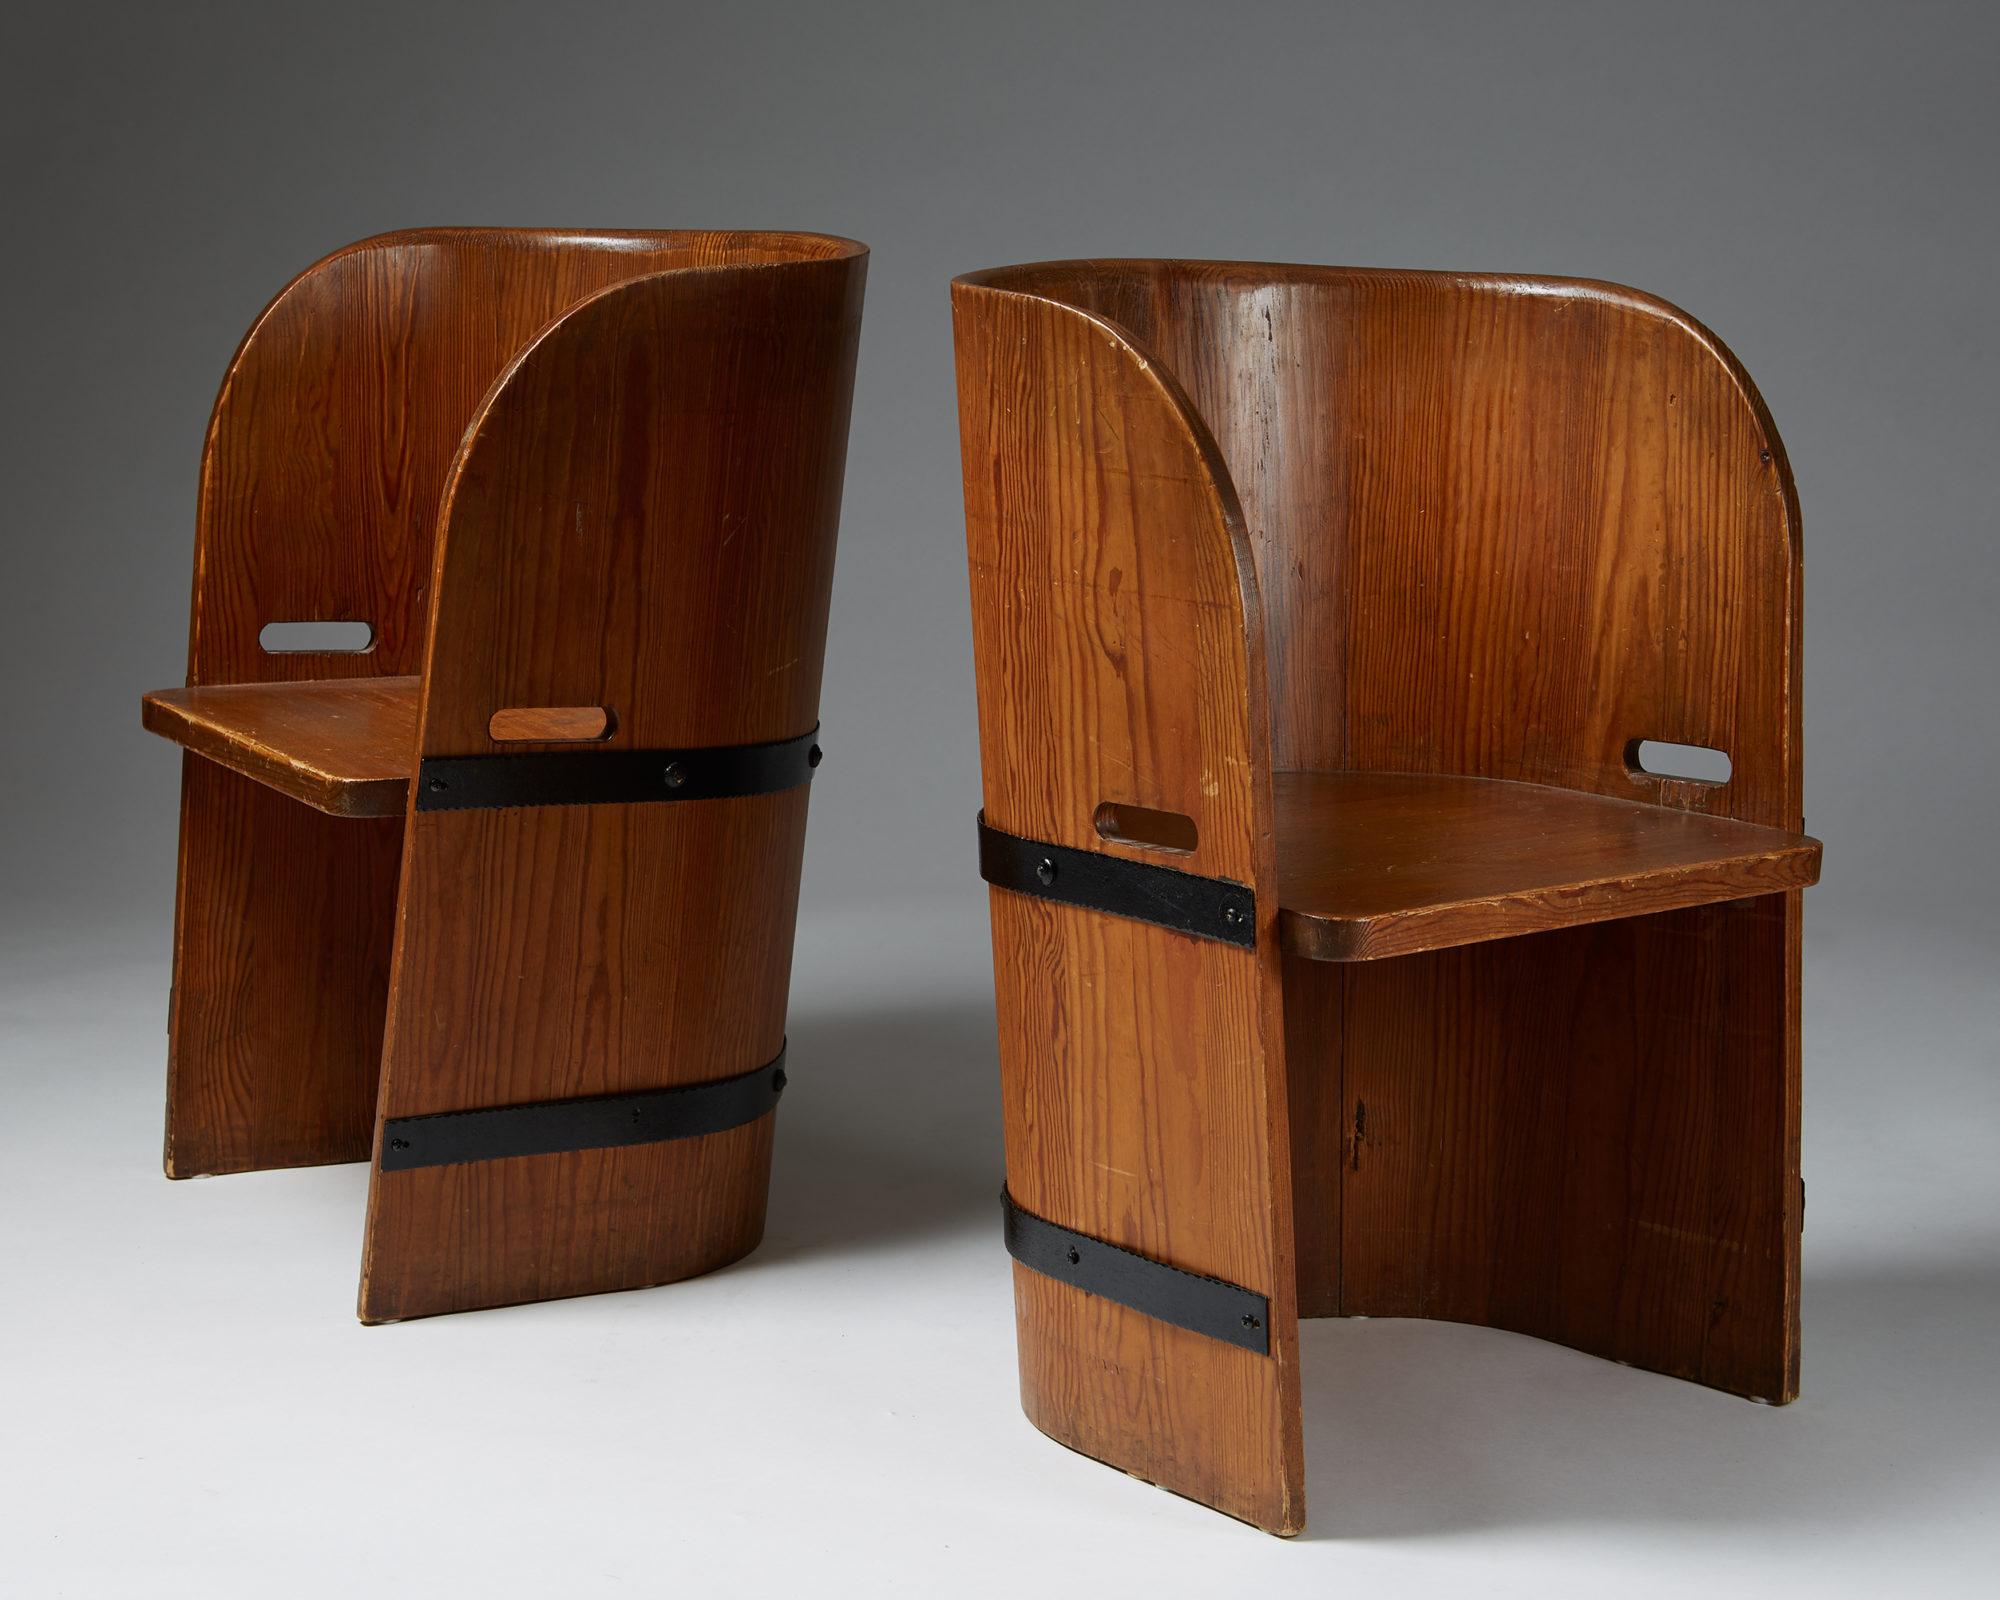 Pair of armchairs anonymous, Sweden, 1940s.
Solid pine and iron.

Measures: H 76 cm/ 30''
W 54 cm/ 21 1/4''
D 44 cm/ 17 1/4''
Seat height 39.5 cm/ 15 1/2''.